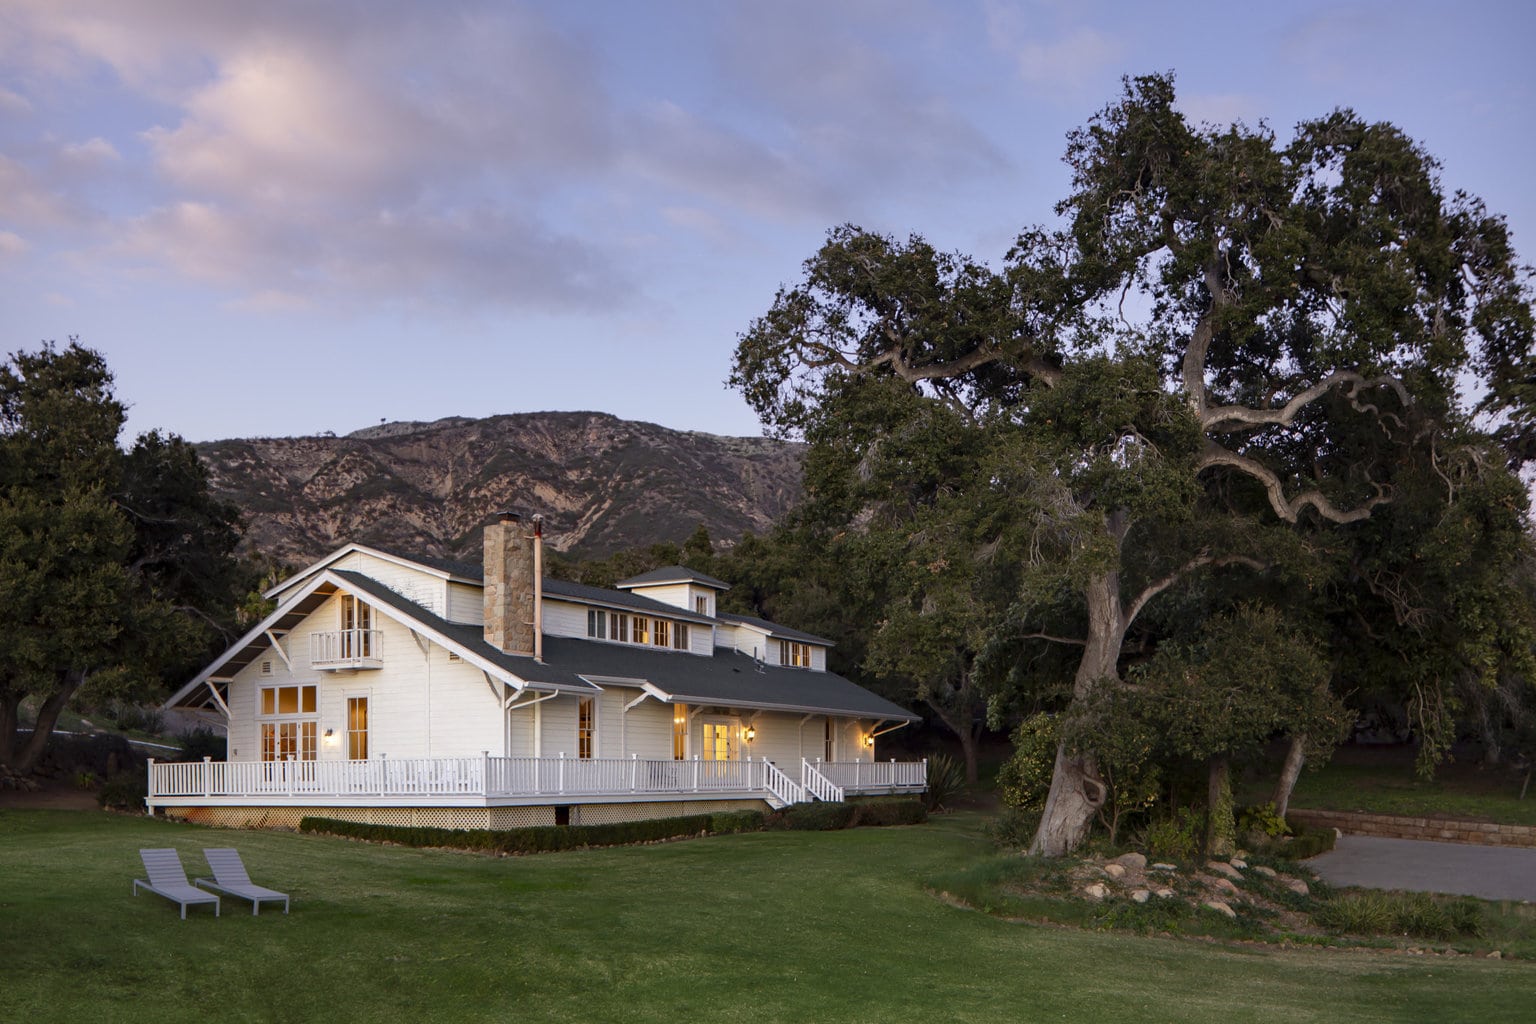 ranch-style-house-at-dusk-with-mountain-views